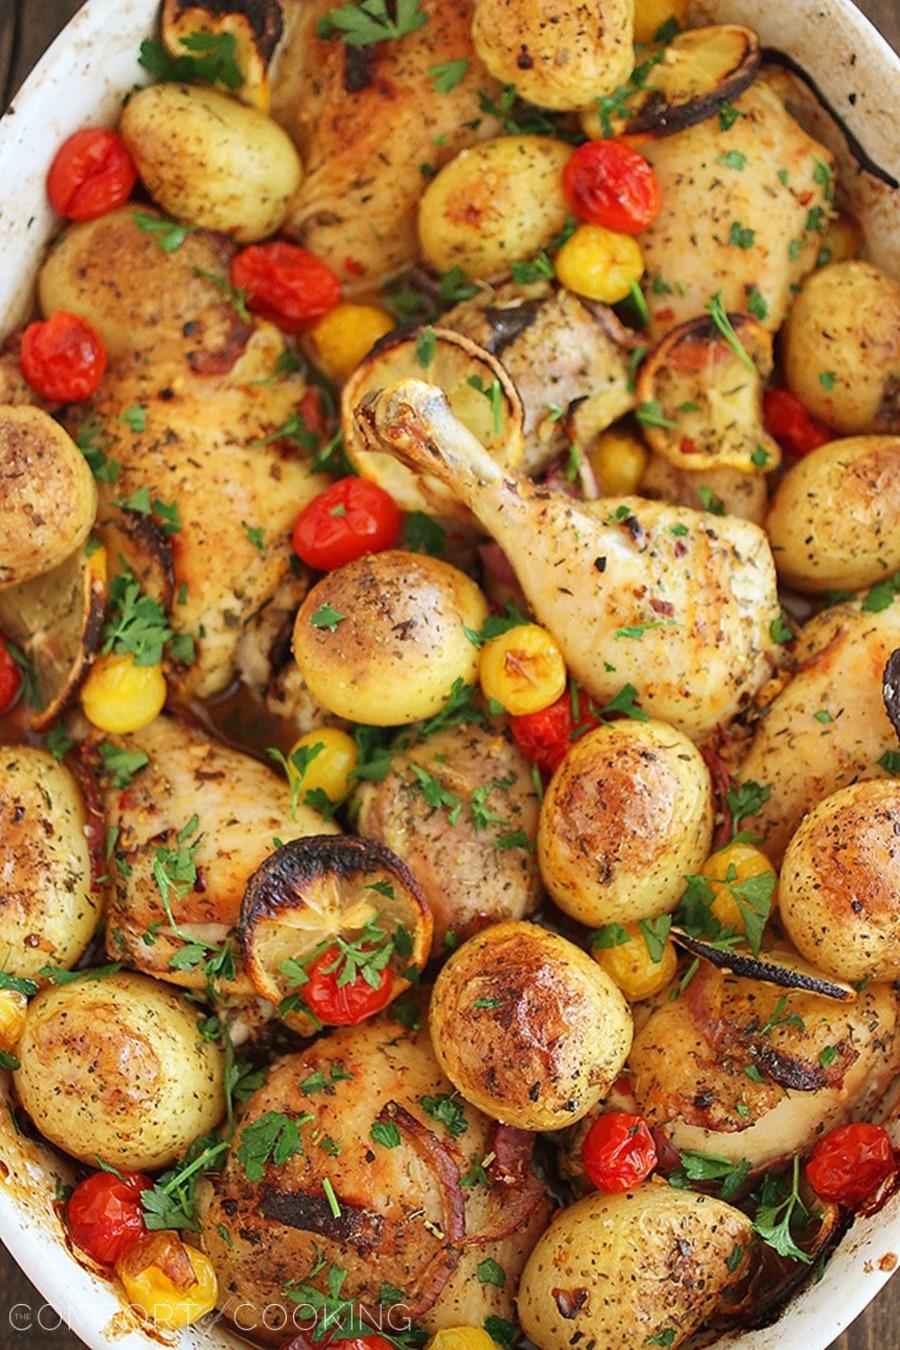 Easy Roasted Lemon Chicken with Tomatoes and Potatoes – Comfort food at its best. Add this hearty, healthy one-pan meal to your weeknight menu! | thecomfortofcooking.com